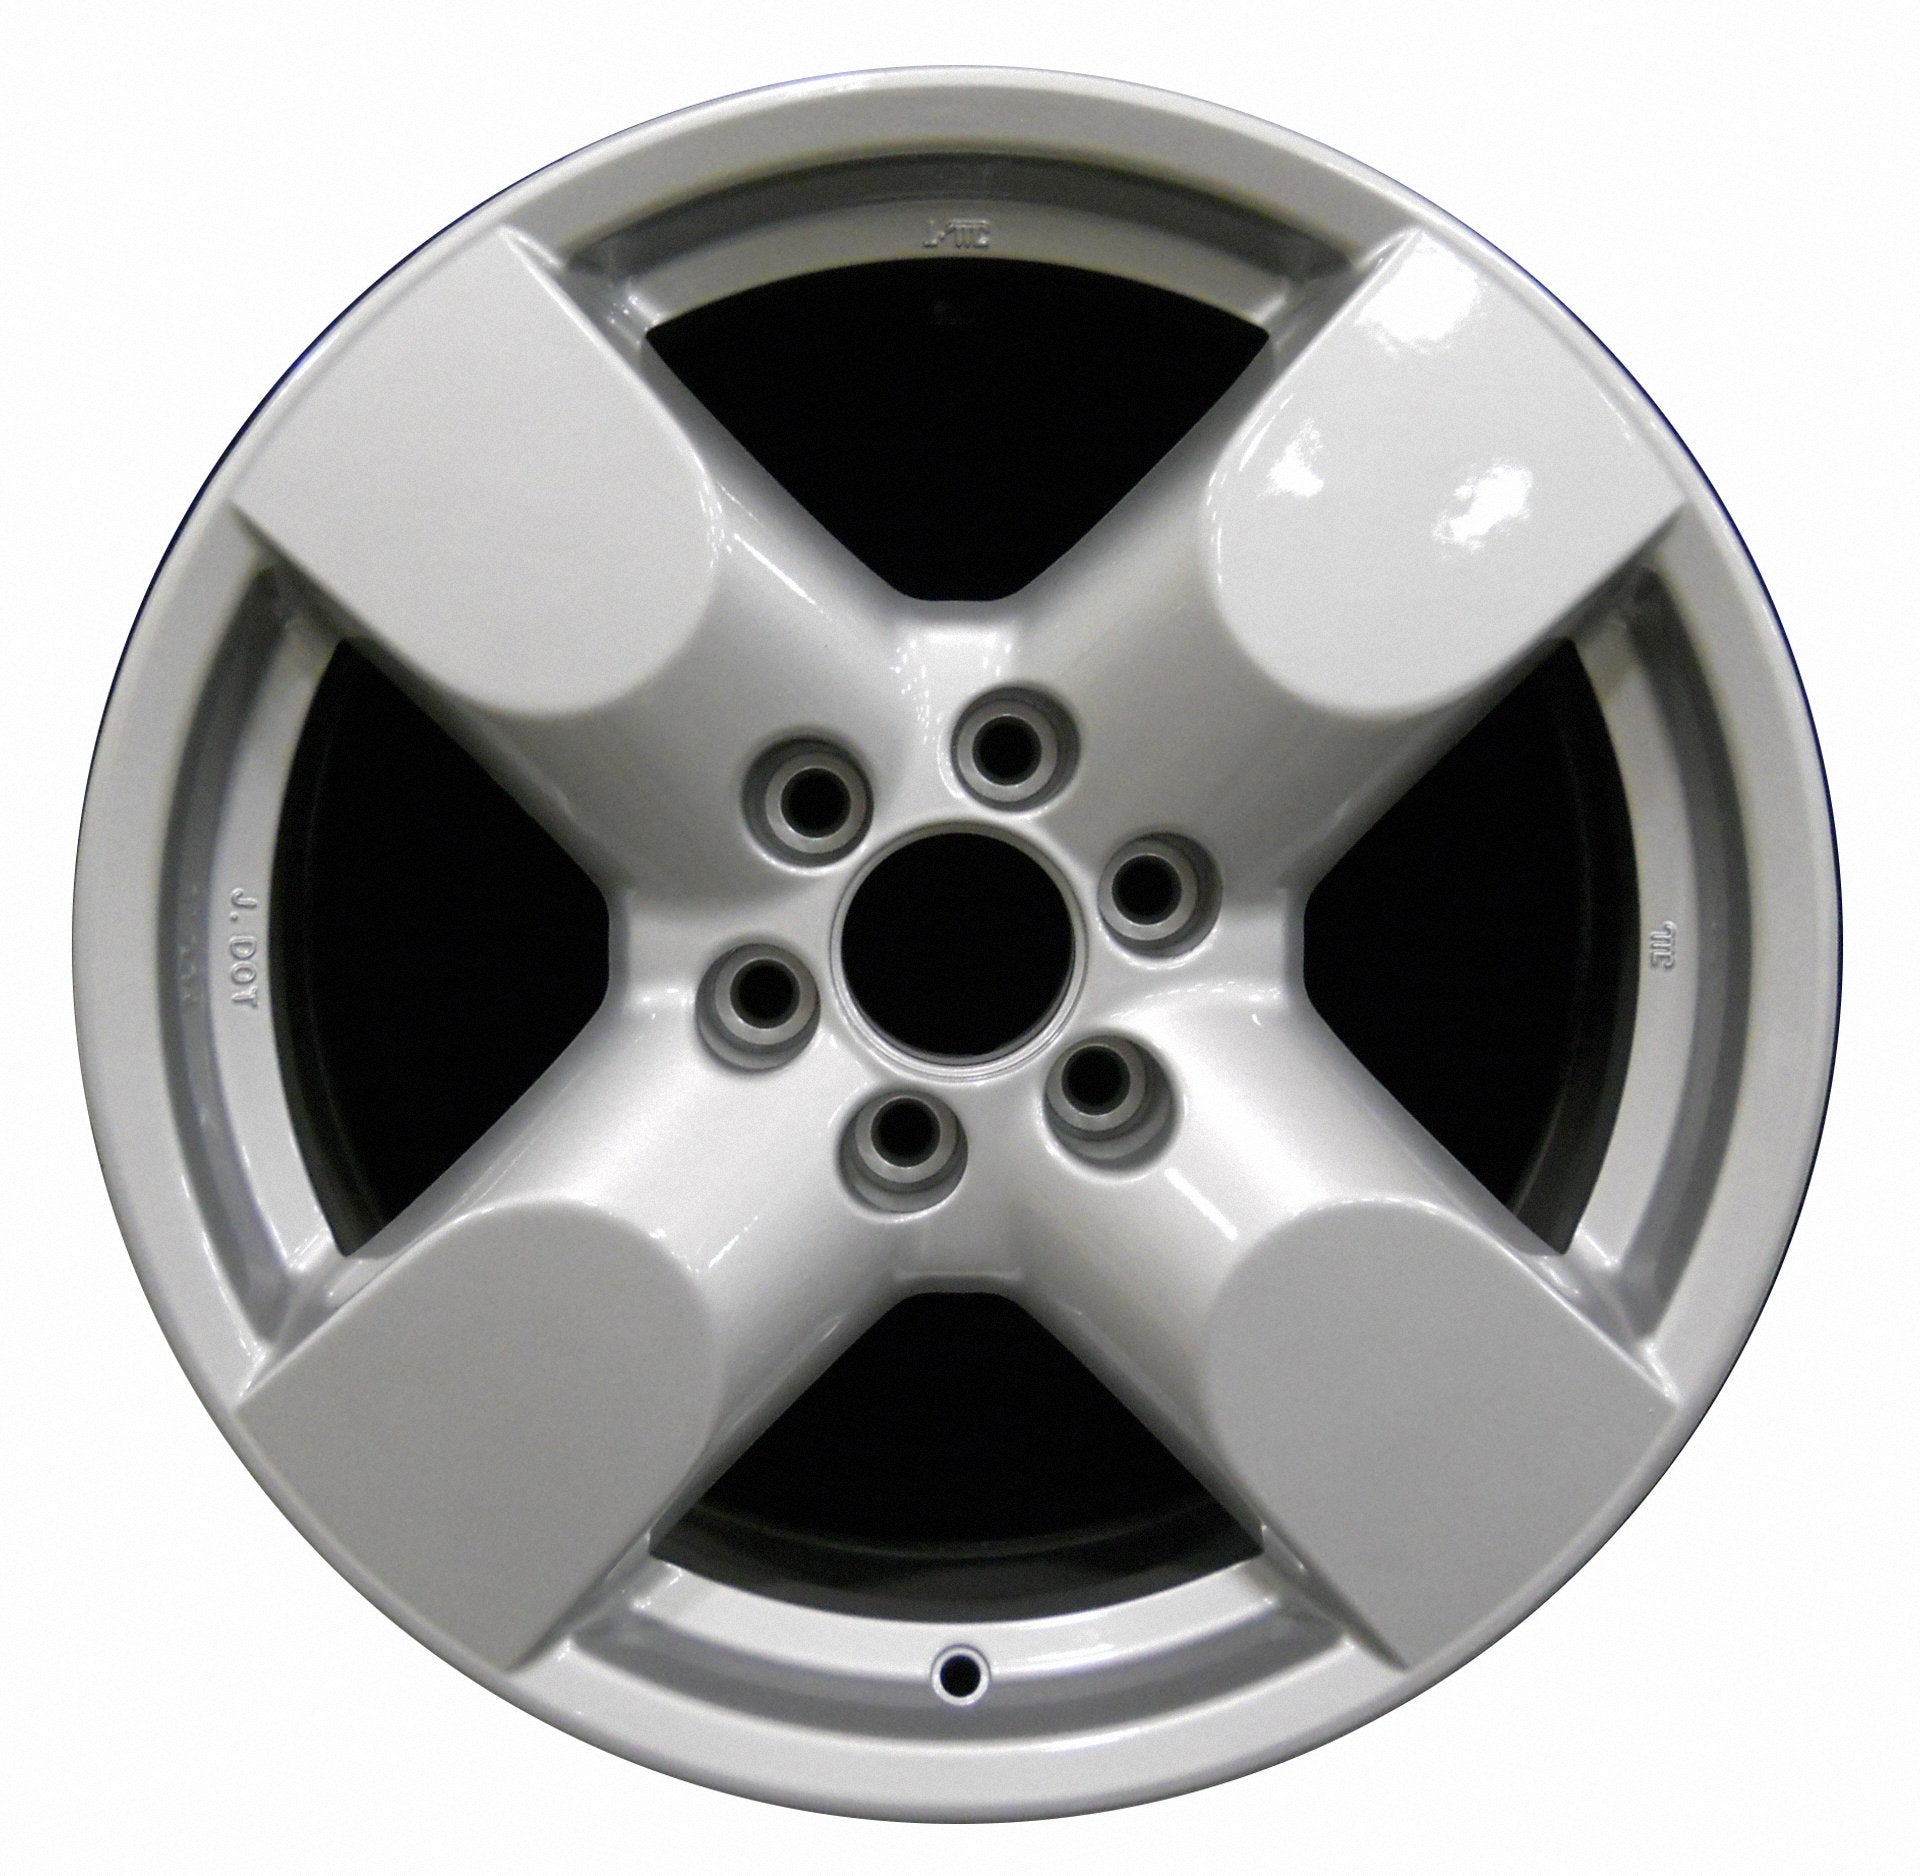 Nissan Frontier  2005, 2006, 2007, 2008 Factory OEM Car Wheel Size 17x7.5 Alloy WAO.62453.PS06.FF